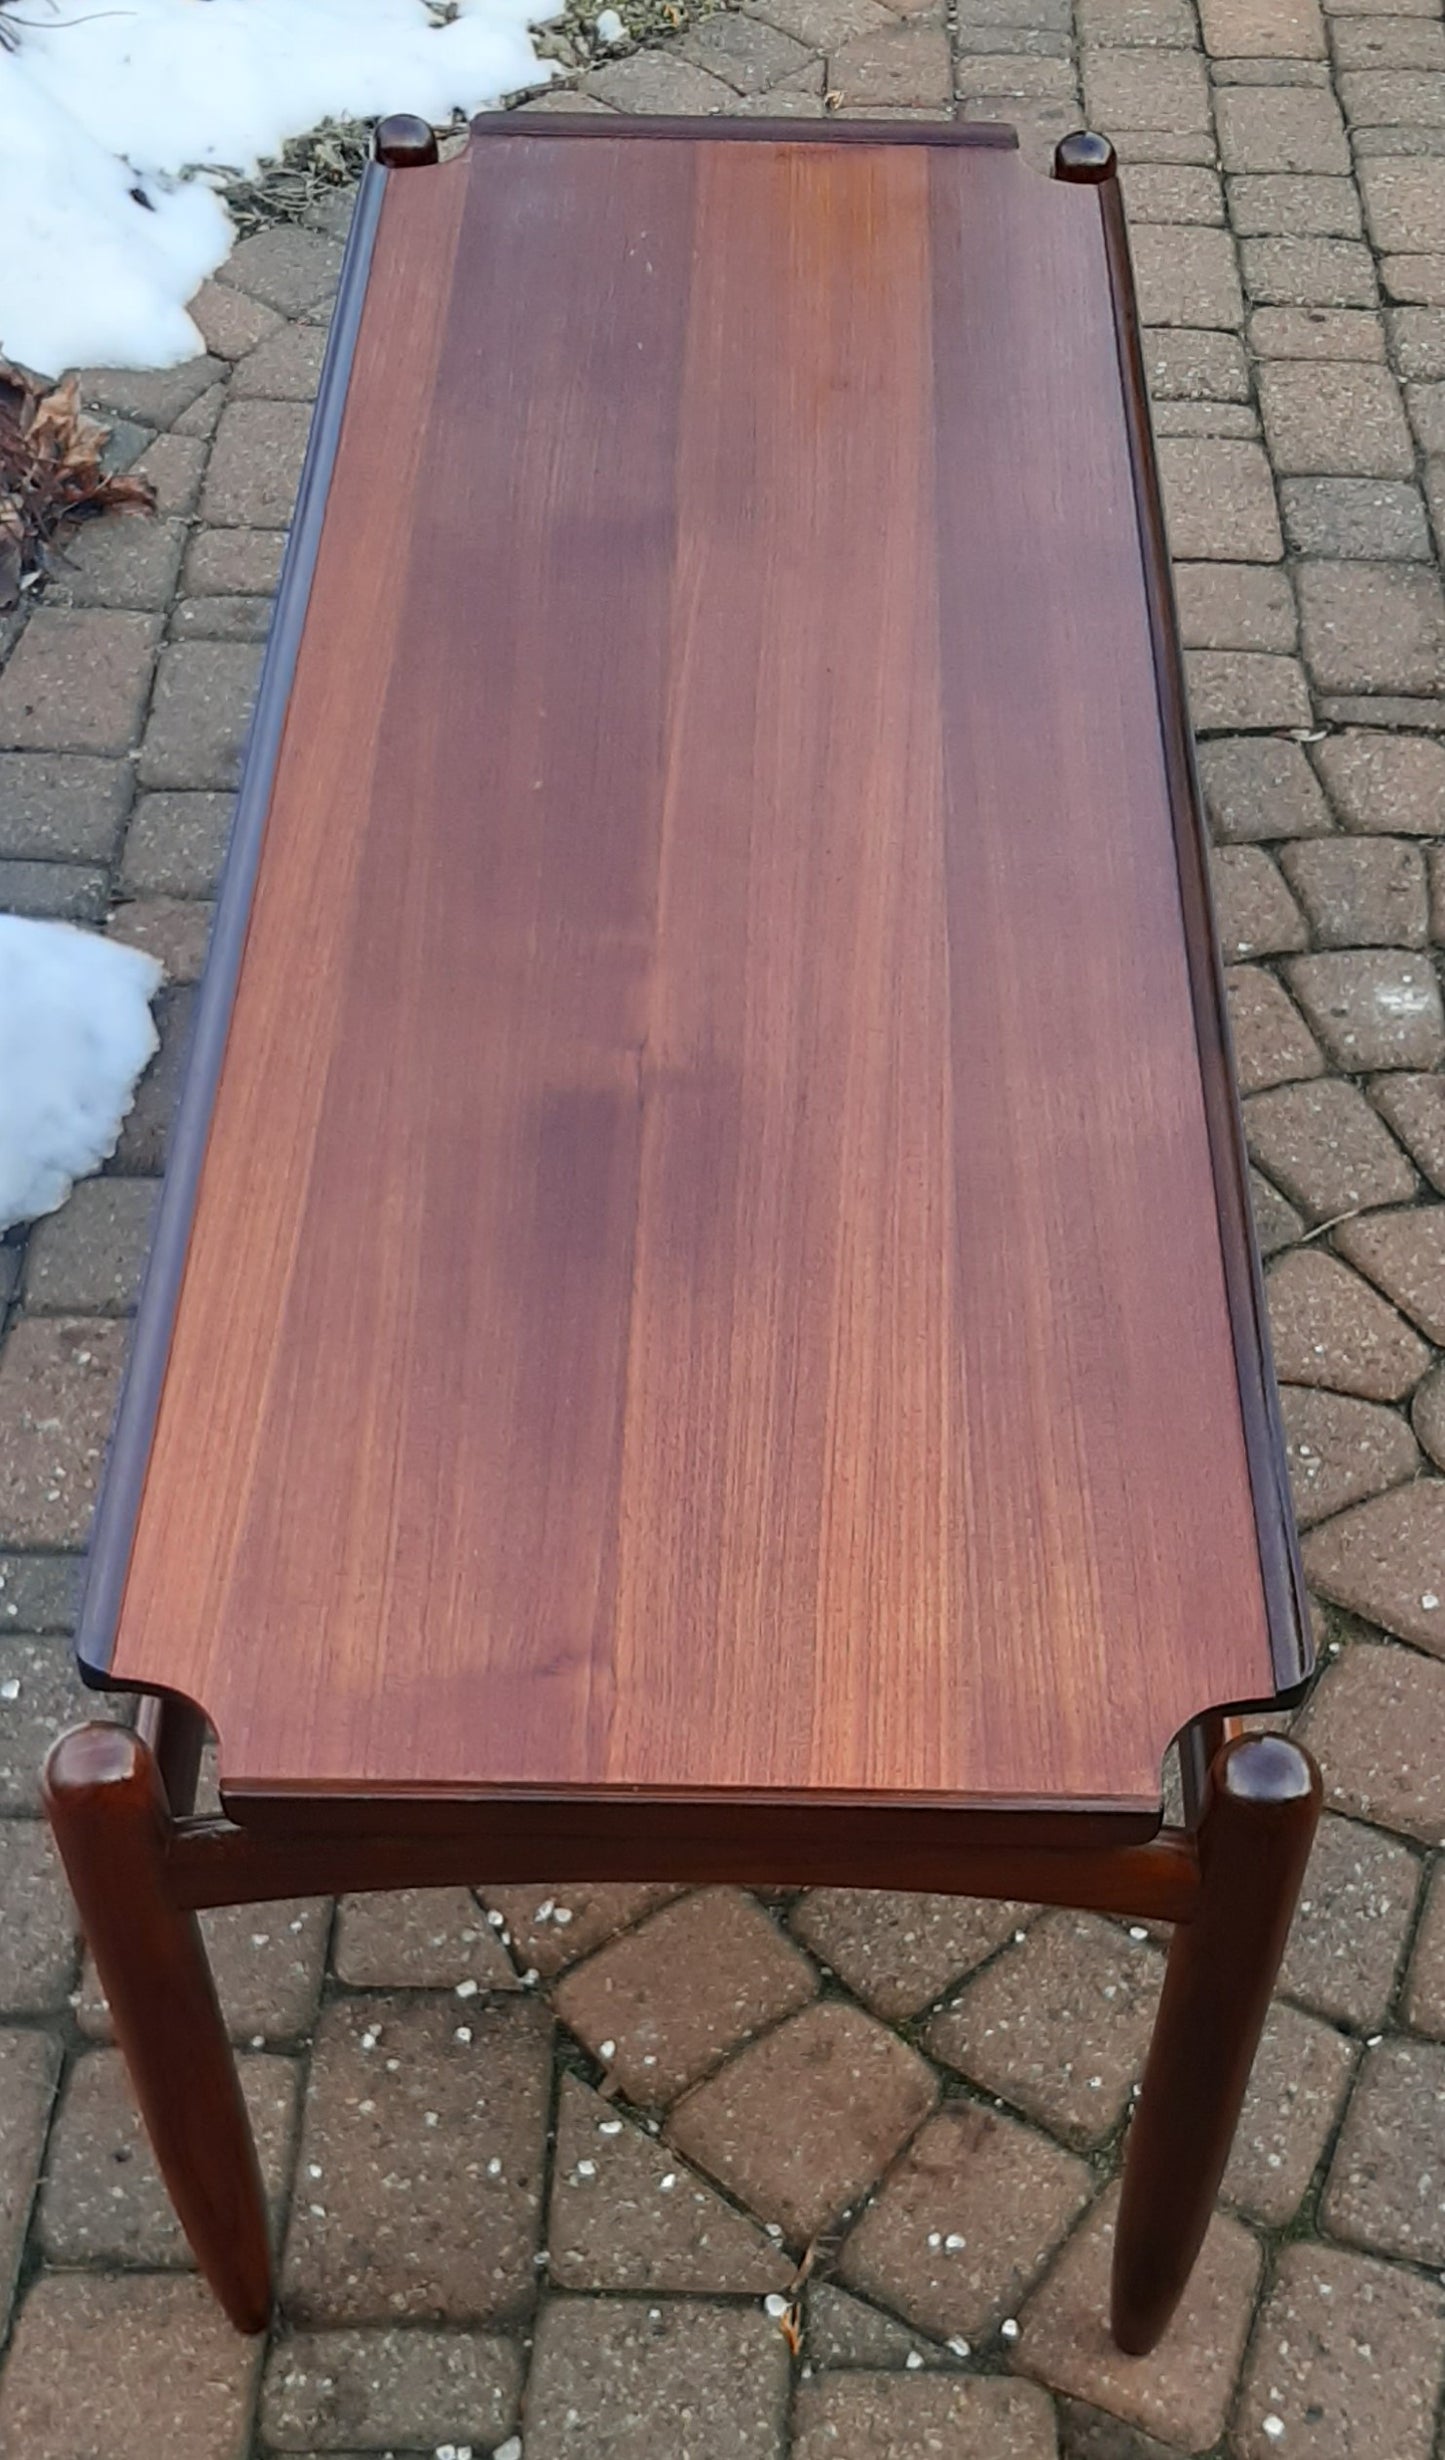 REFINISHED MCM Teak Coffee Table 49", H. Wegner style, PERFECT